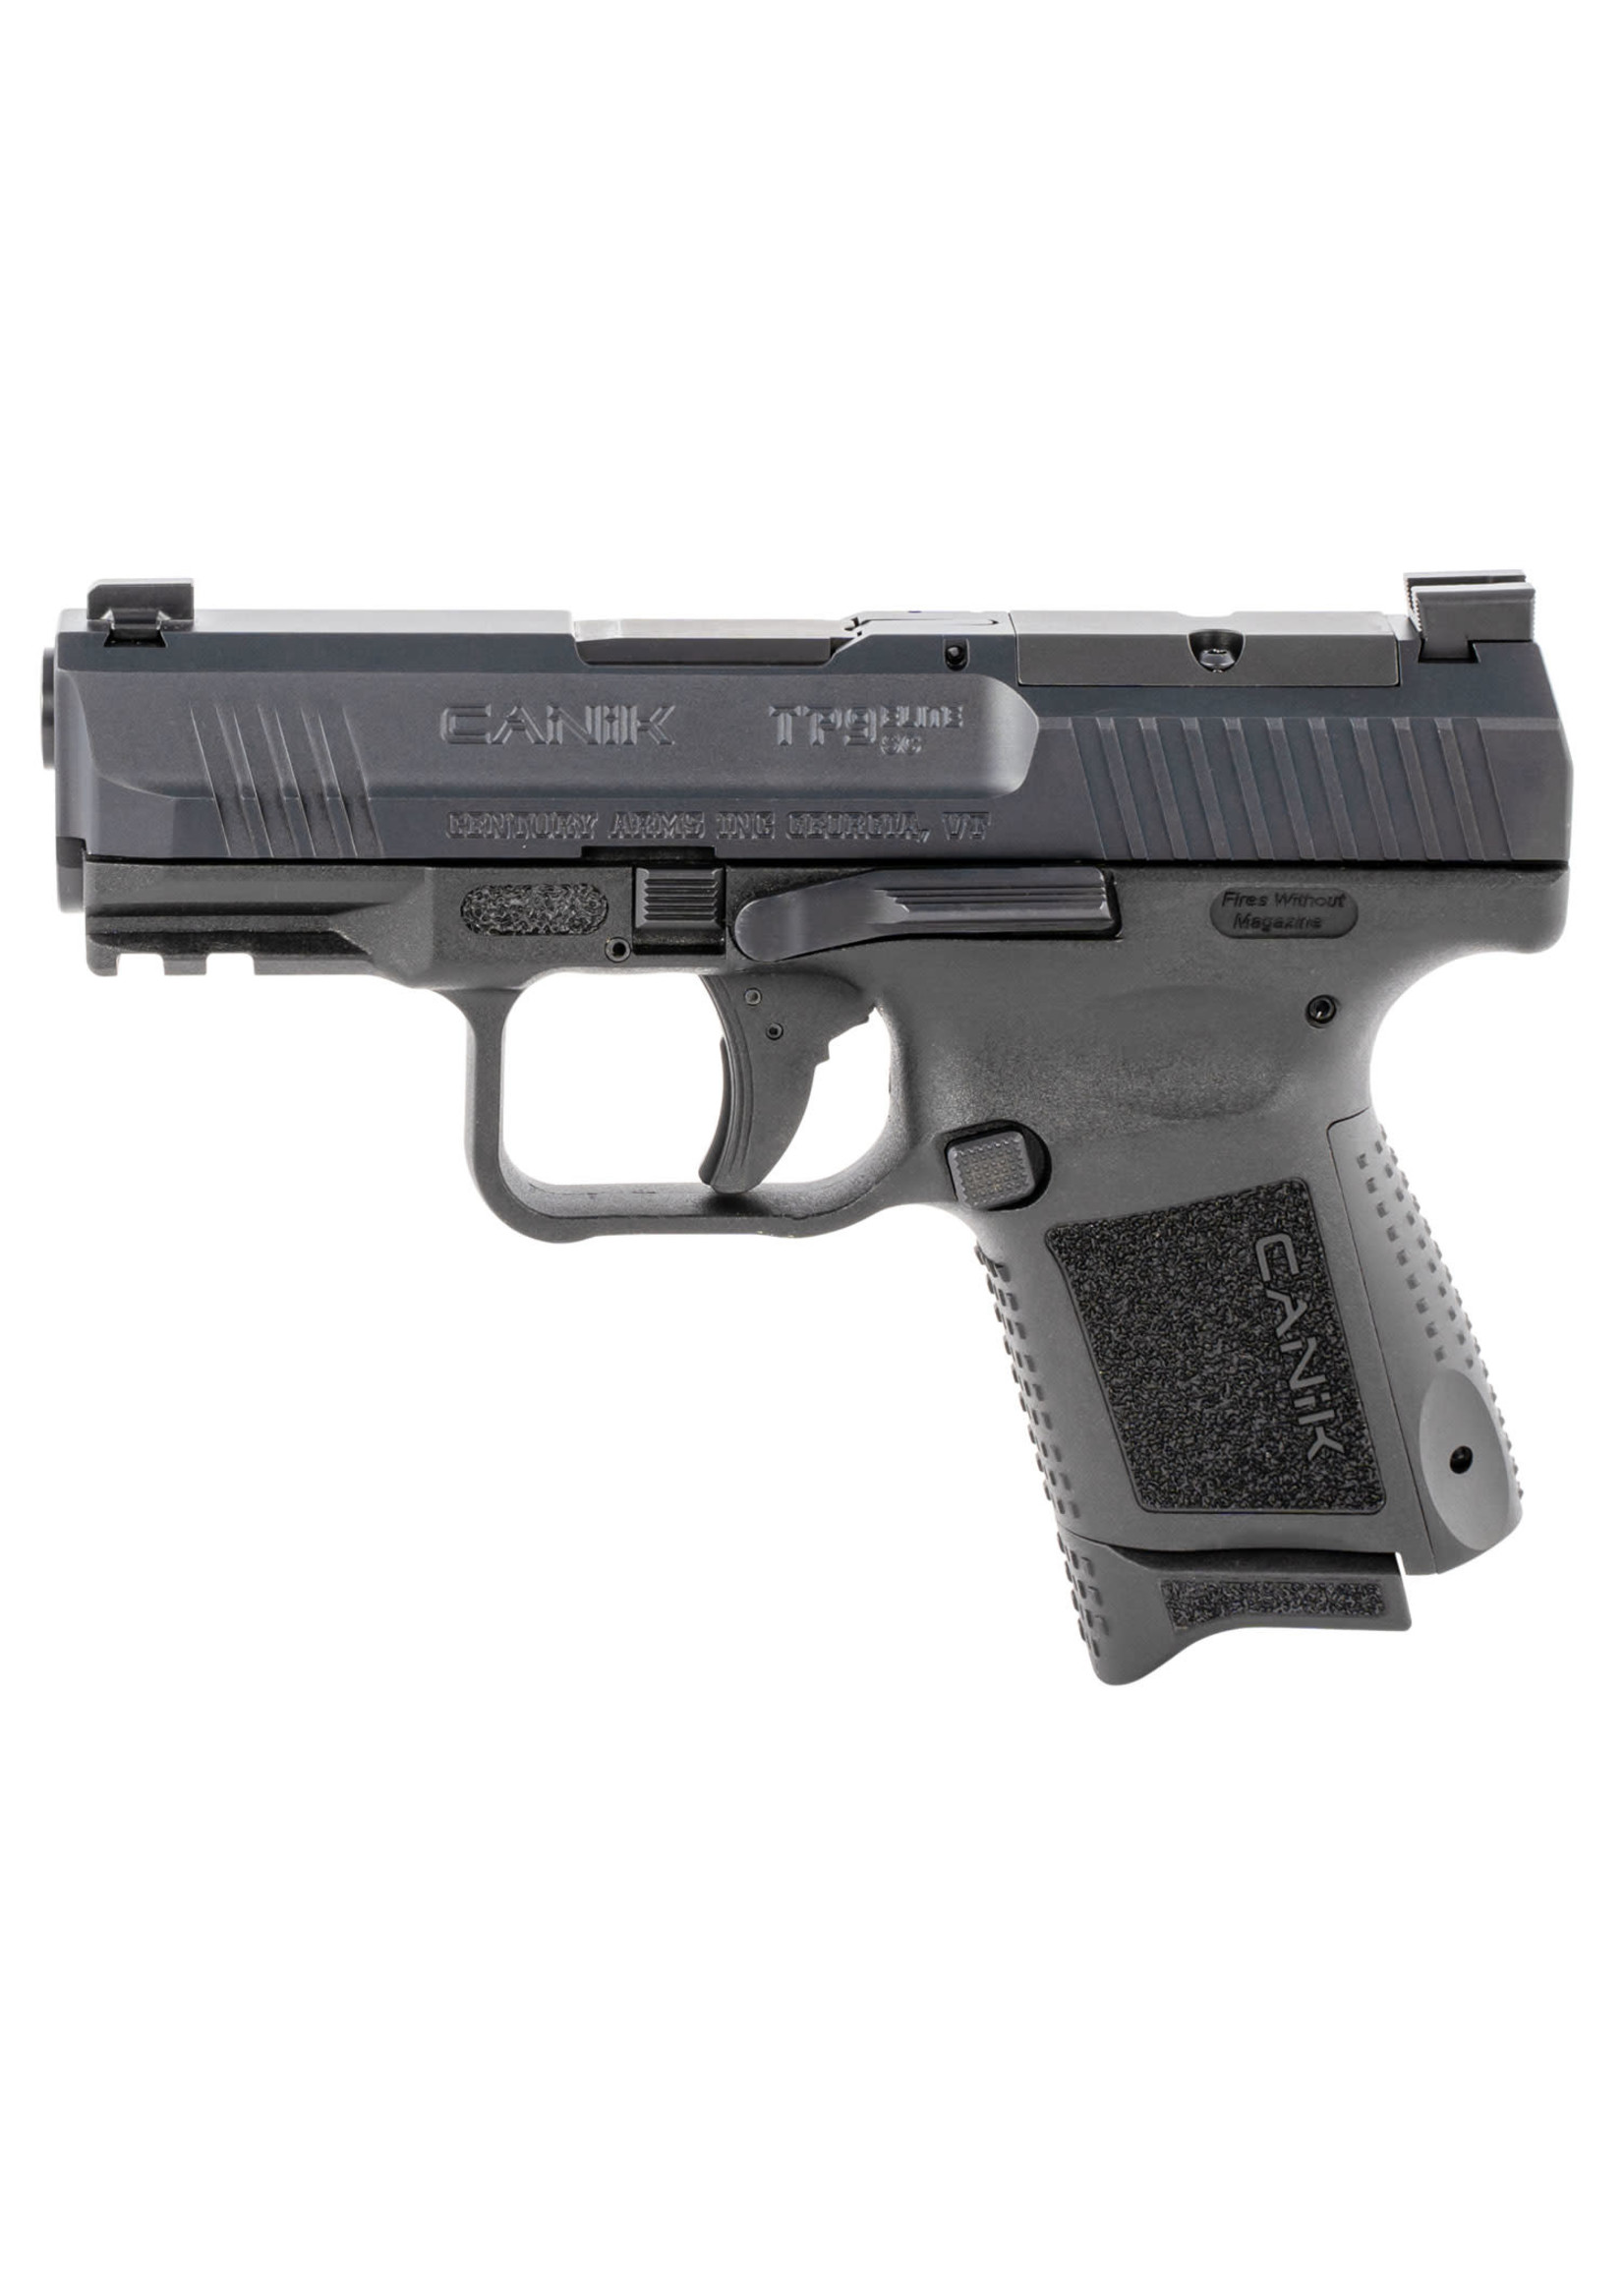 Canik Canik TP9 Elite Subcompact 9mm Luger Caliber with 3.60" Barrel, 15+1 or 12+1 Capacity, Black Finish with Picatinny Rail, Serrated Nitride Finish Steel Slide & Interchangeable Backstrap Grip